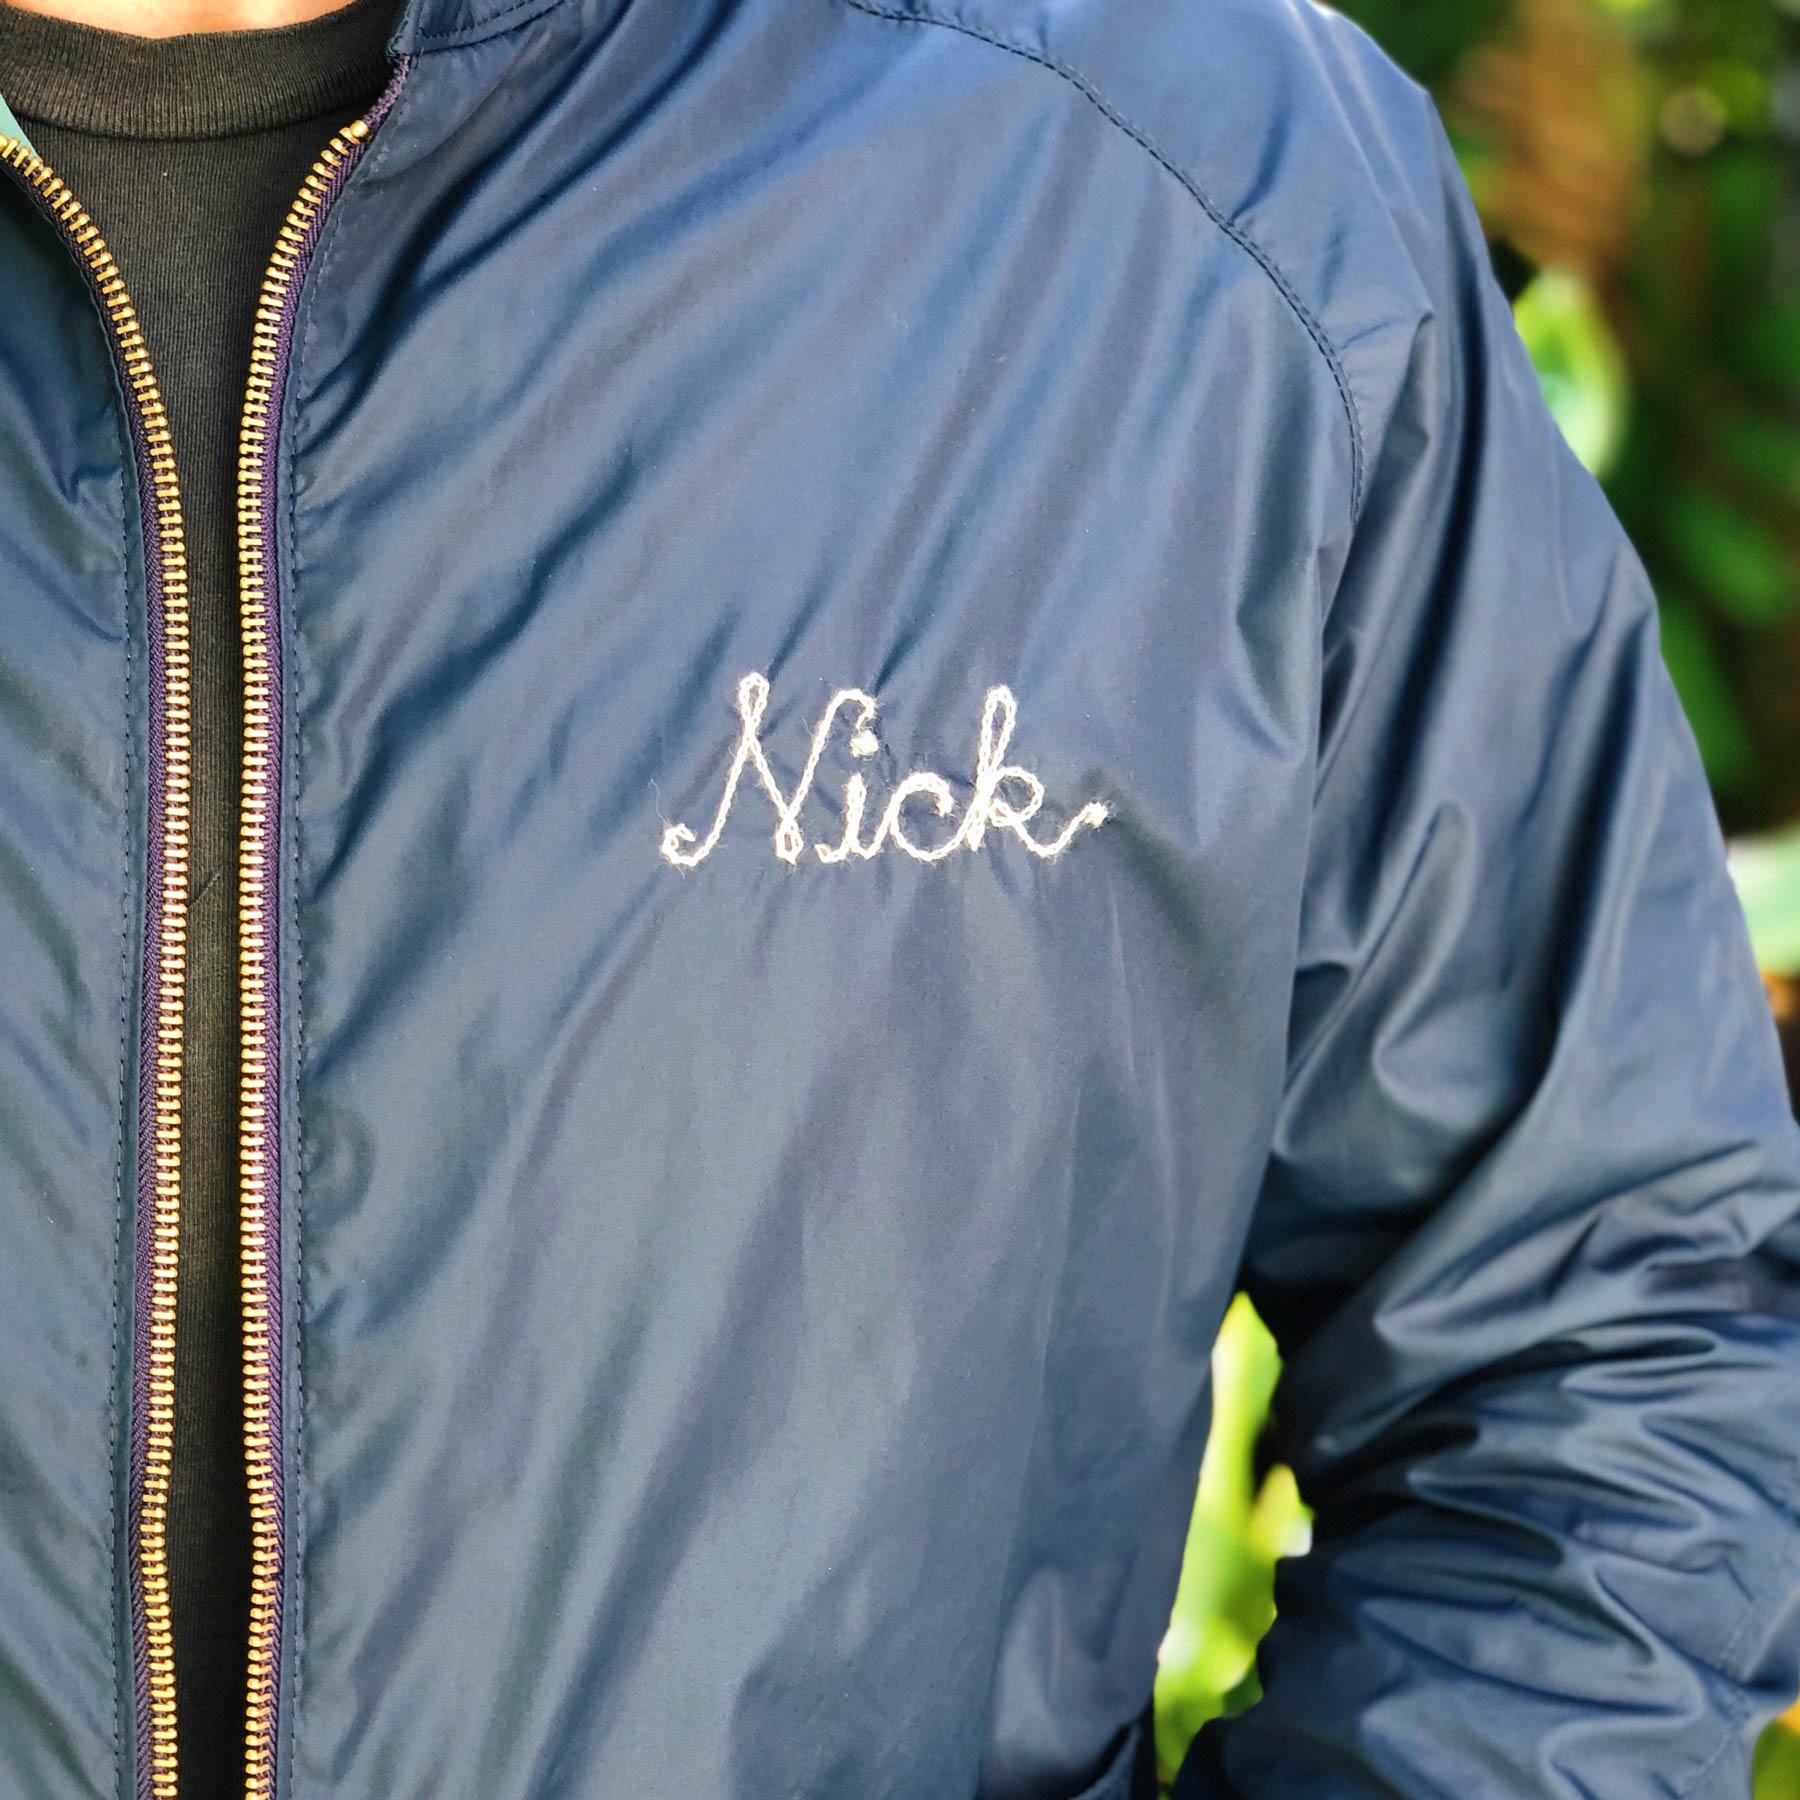 60's style surf competition jacket with custom chain stitching by Nick Kuchar